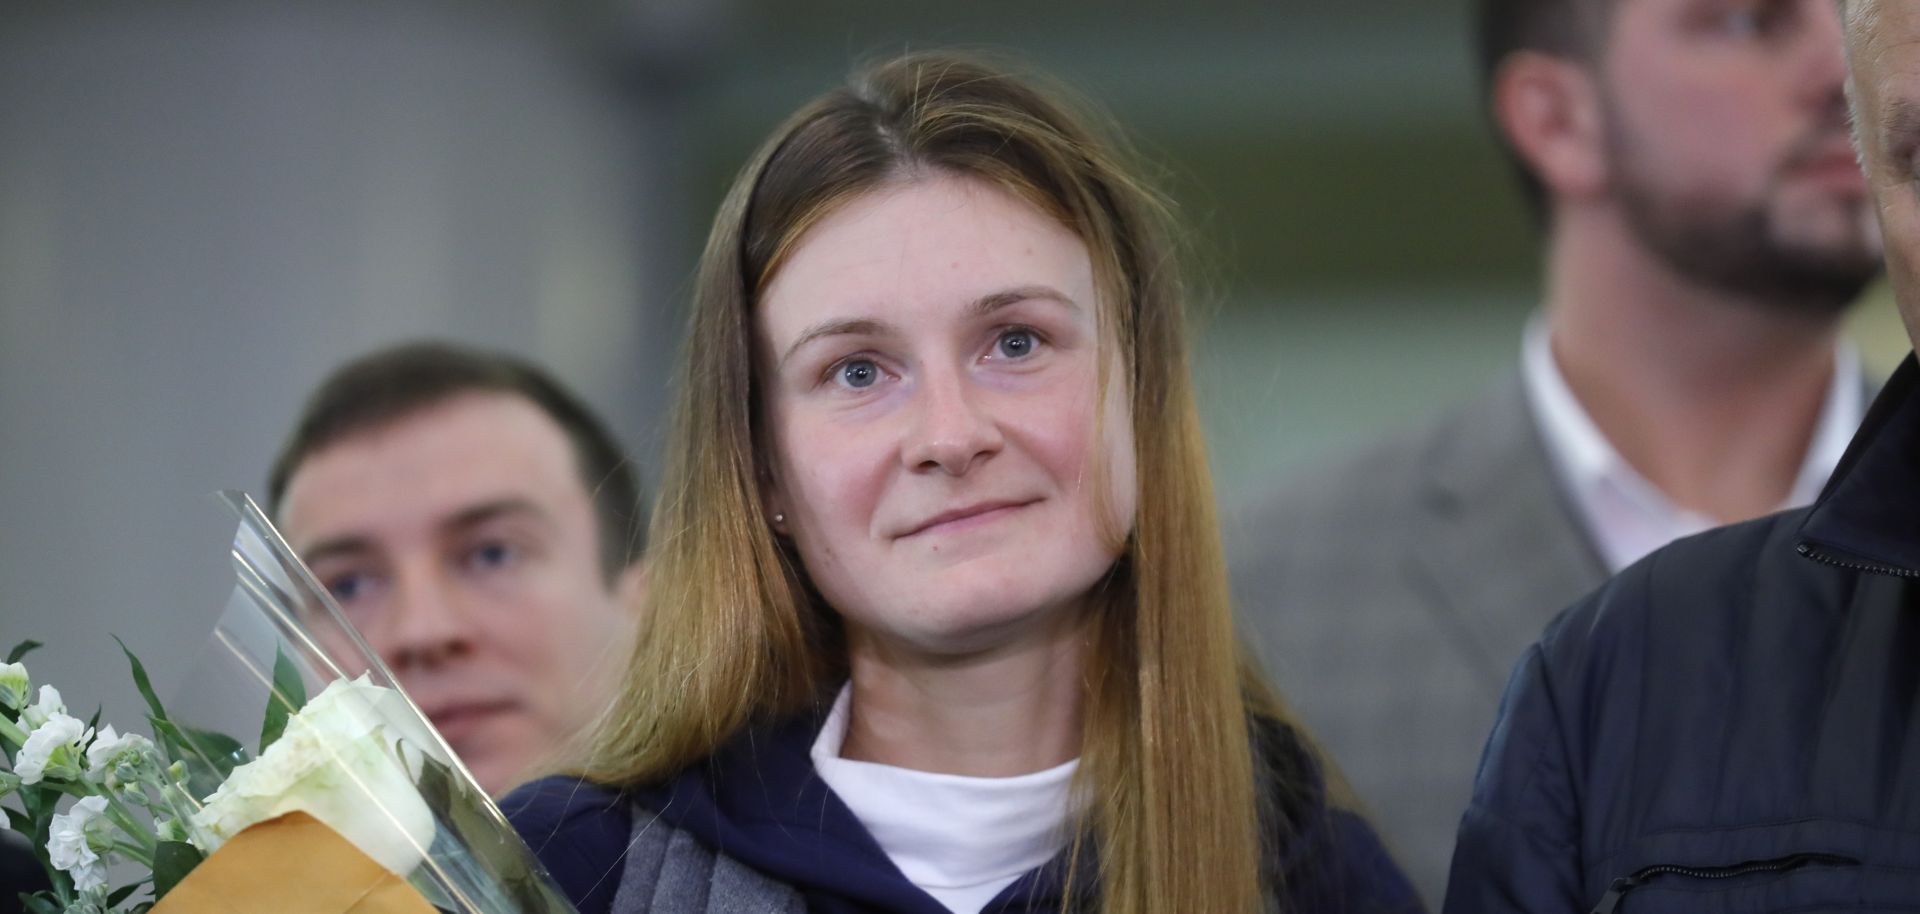 Russia's Maria Butina arrives at Moscow's Sheremetyevo International Airport on Oct. 26, 2019, after her deportation from the United States for failing to register as a foreign agent.